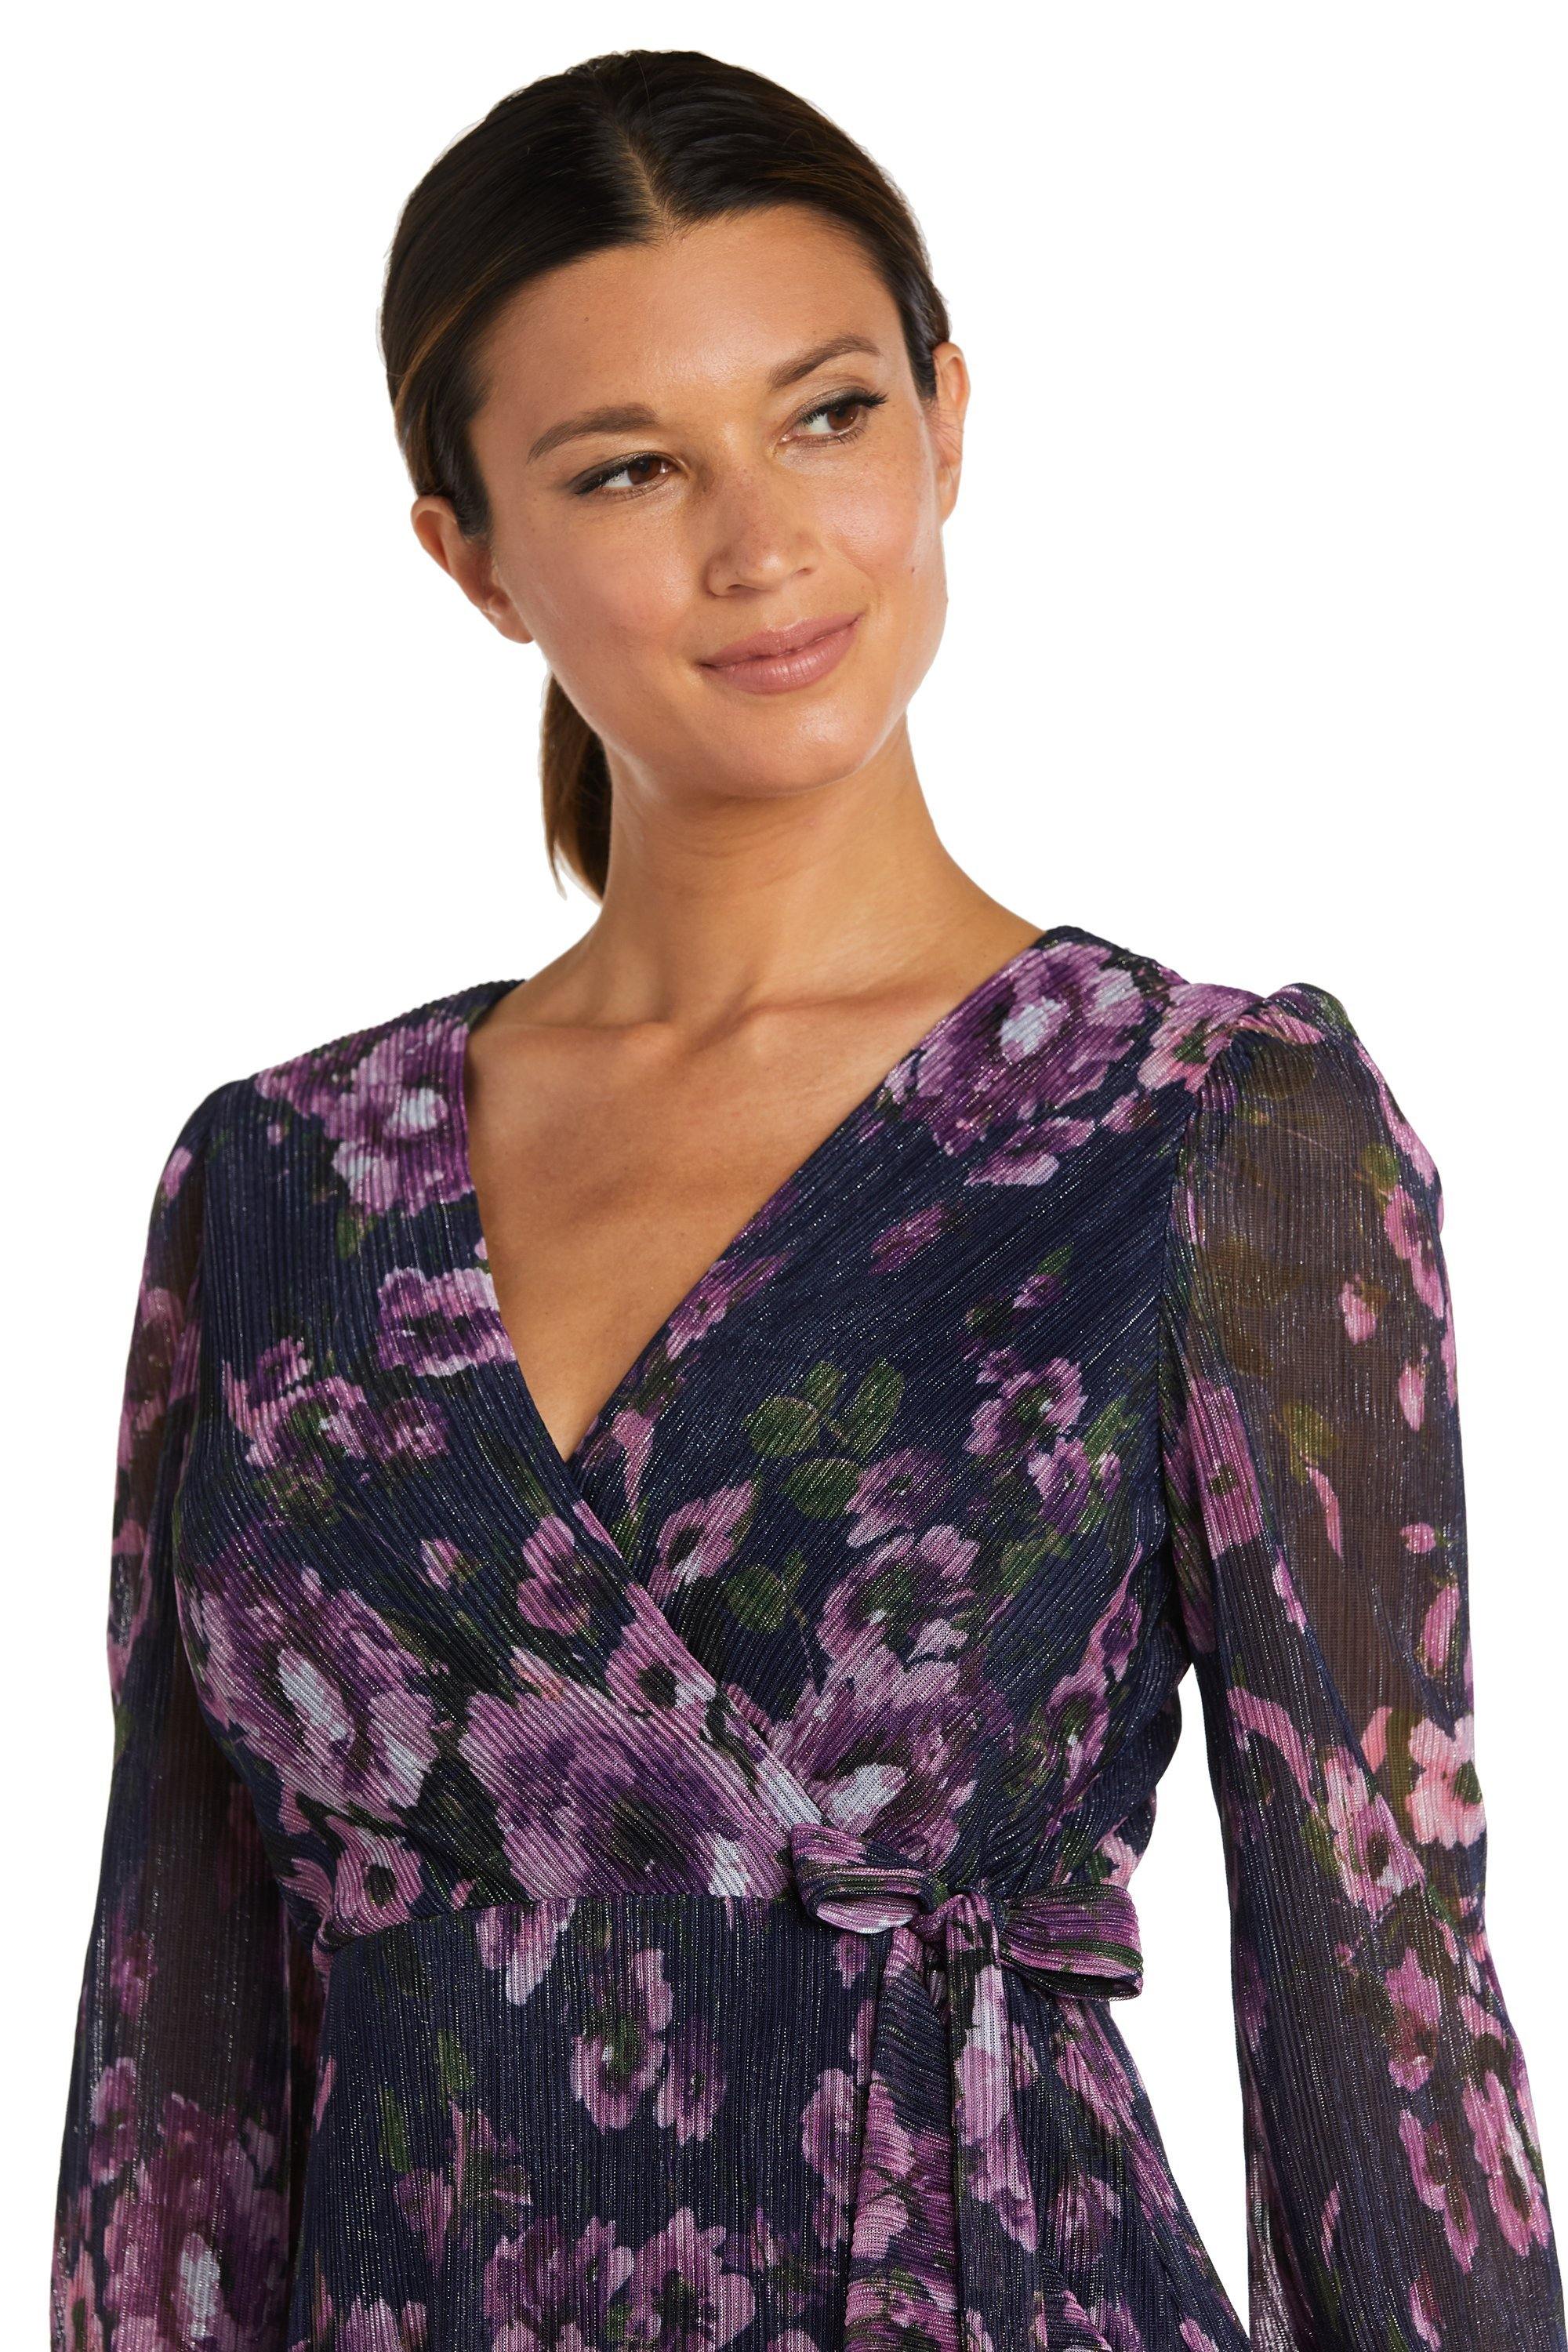 Nightway High Low Long Sleeve Floral Dress 22051 - The Dress Outlet